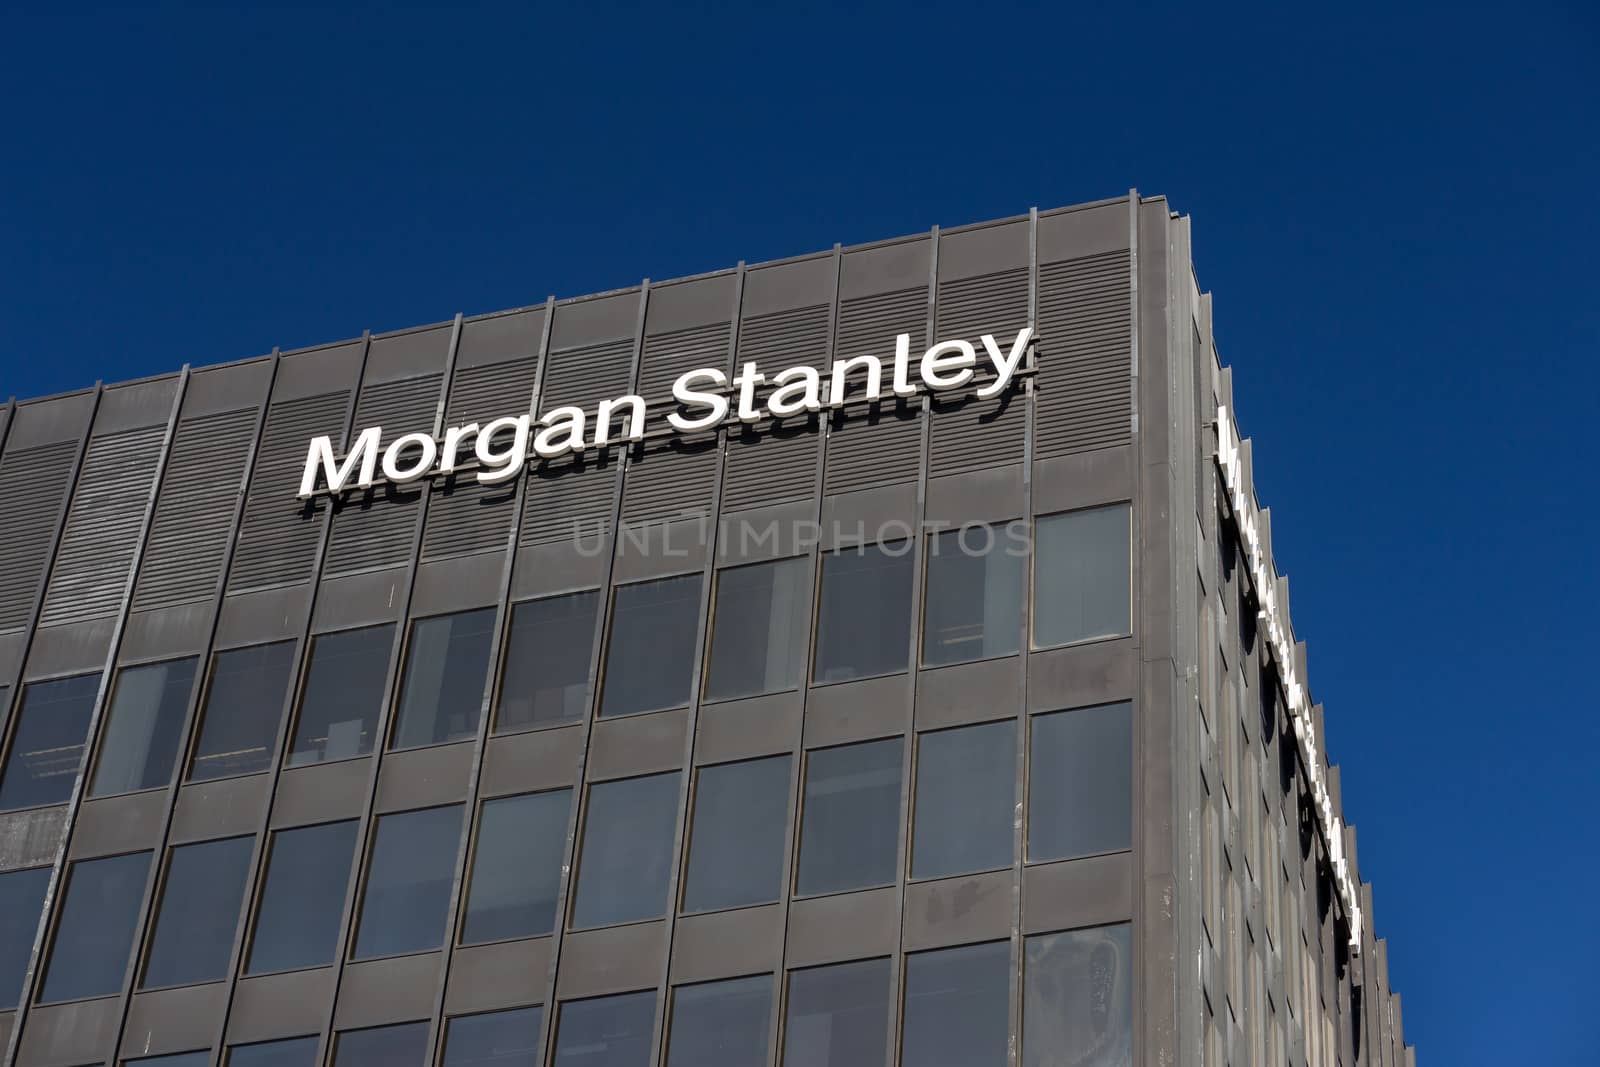 Morgan Stanley Building and Logo by wolterk